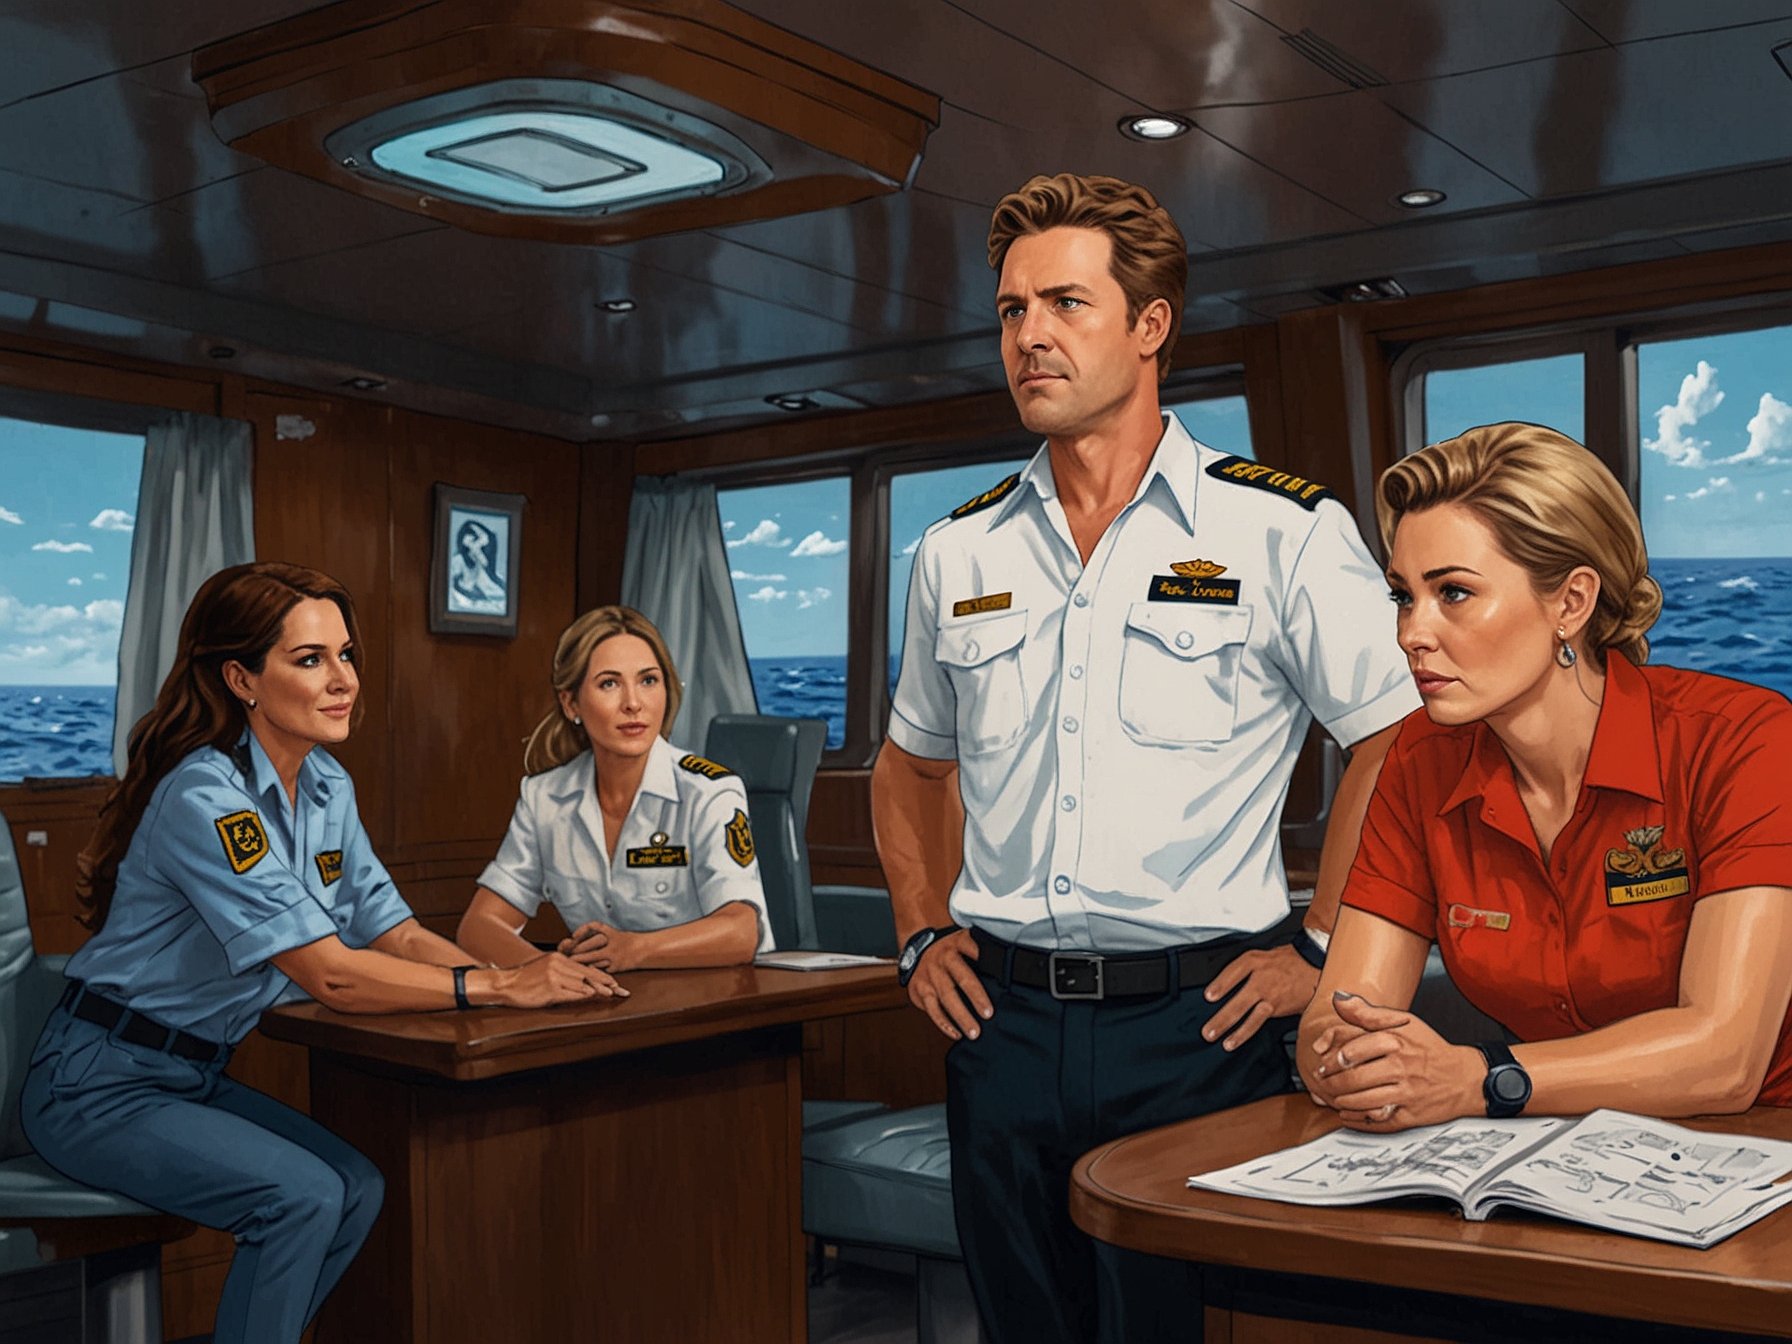 A tense moment on Below Deck Mediterranean where the crew frantically coordinates efforts to retrieve a drifting guest, showcasing the high-stakes drama and challenges of maritime operations.